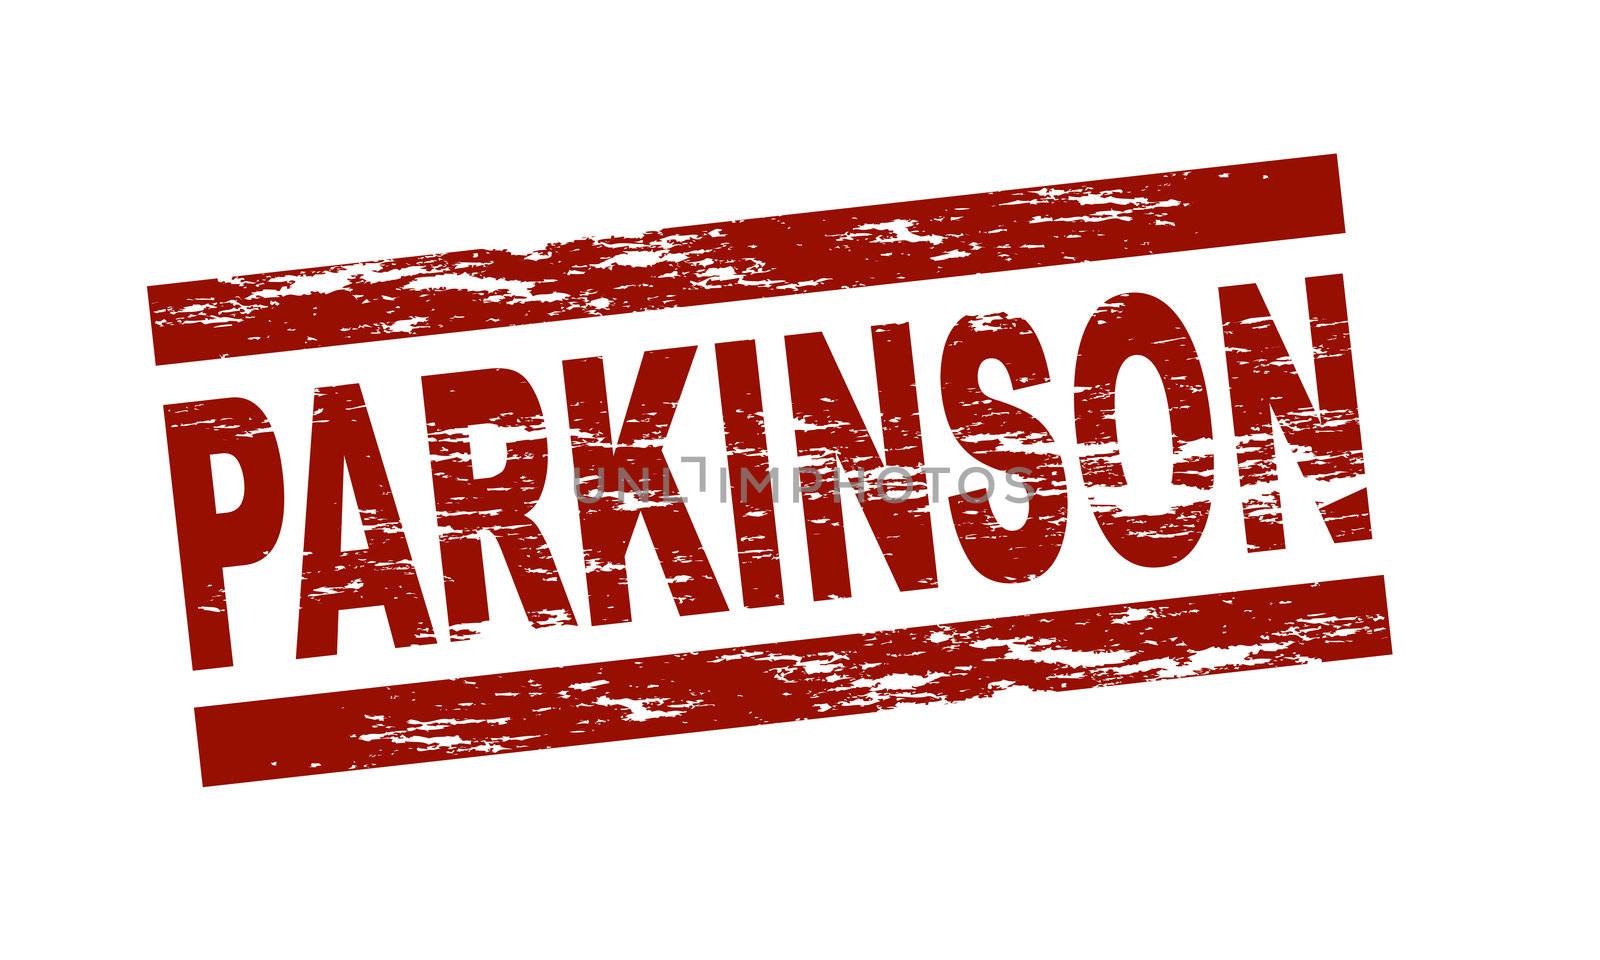 Stylized red stamp showing the term Parkinson. All on white background.